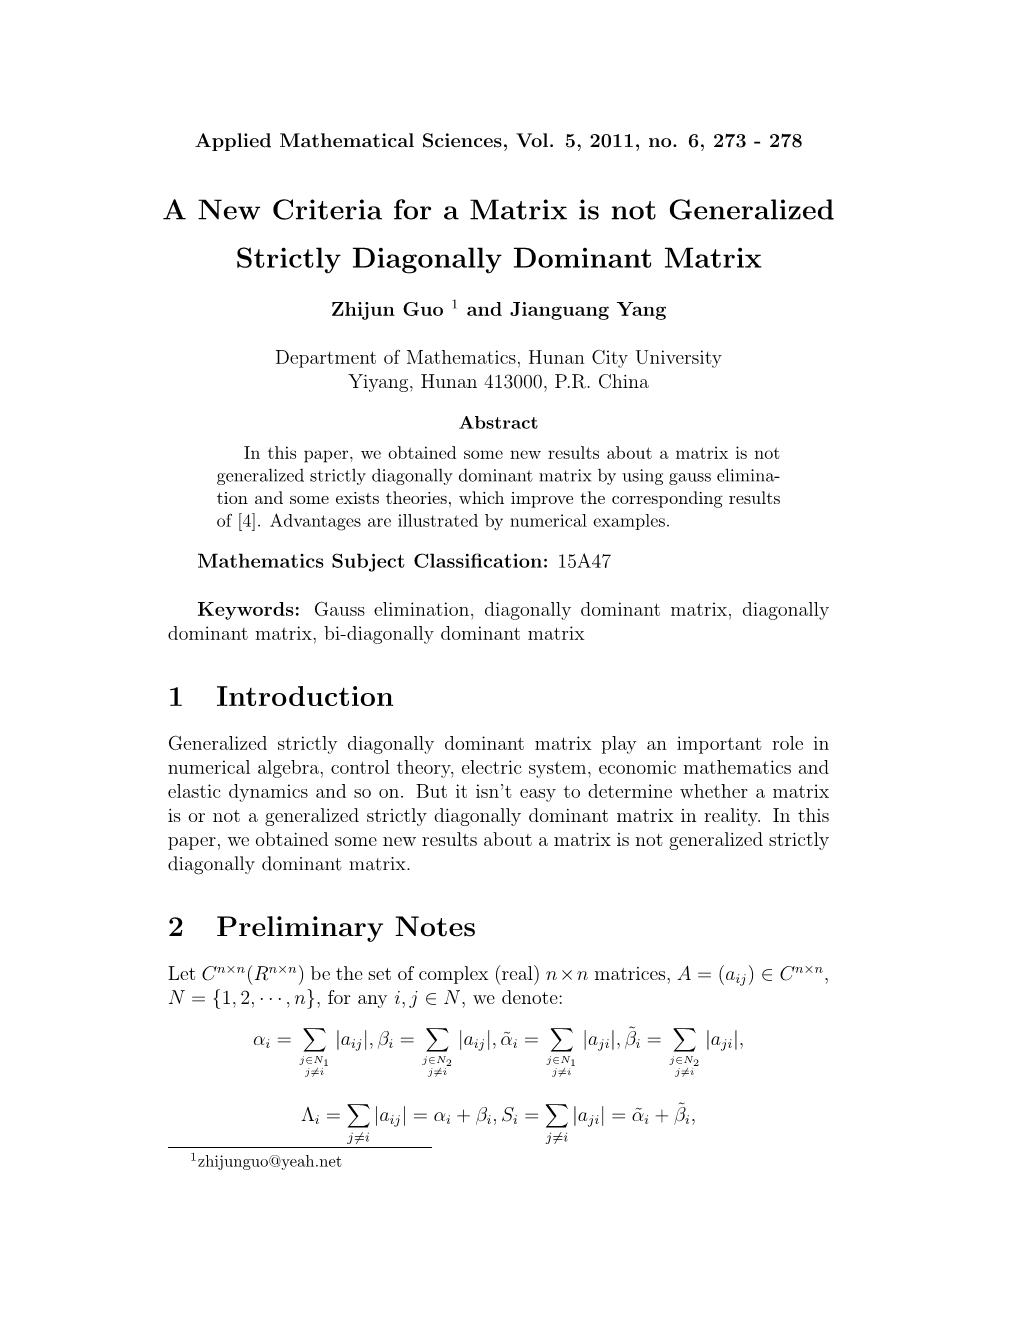 A New Criteria for a Matrix Is Not Generalized Strictly Diagonally Dominant Matrix